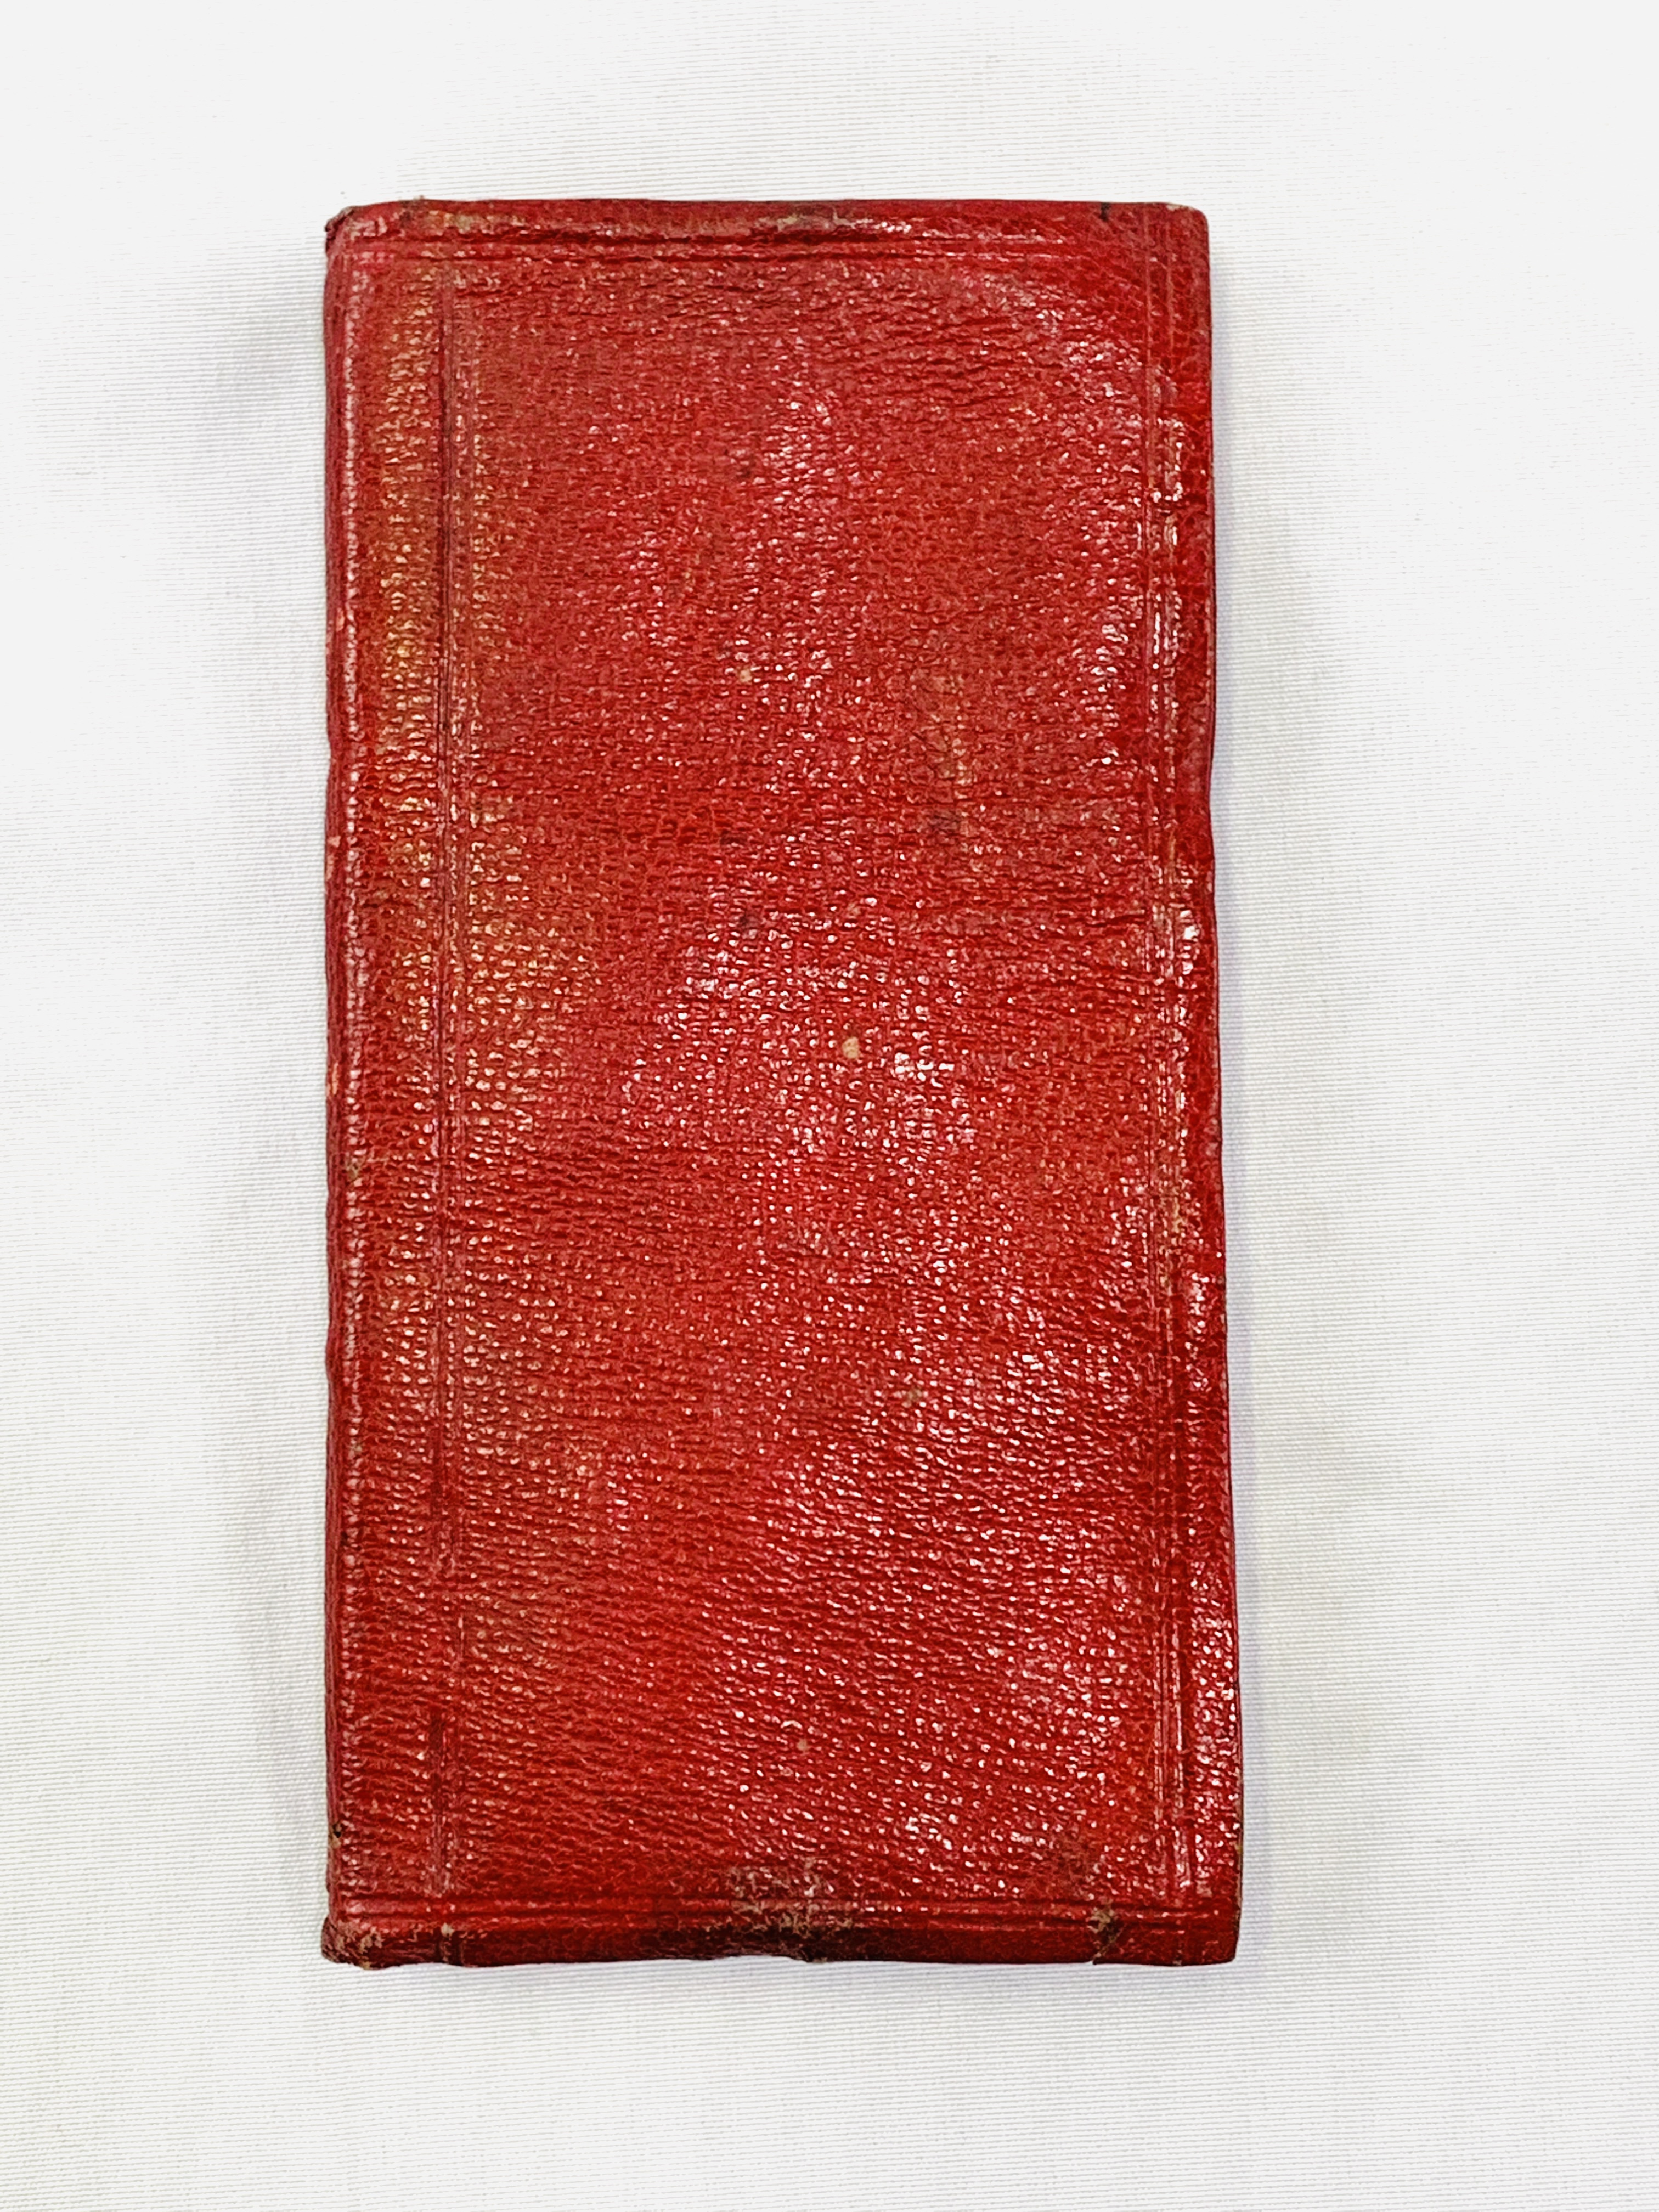 Goldsmith's Almanack dated 1775, bound in red calf leather - Image 4 of 4